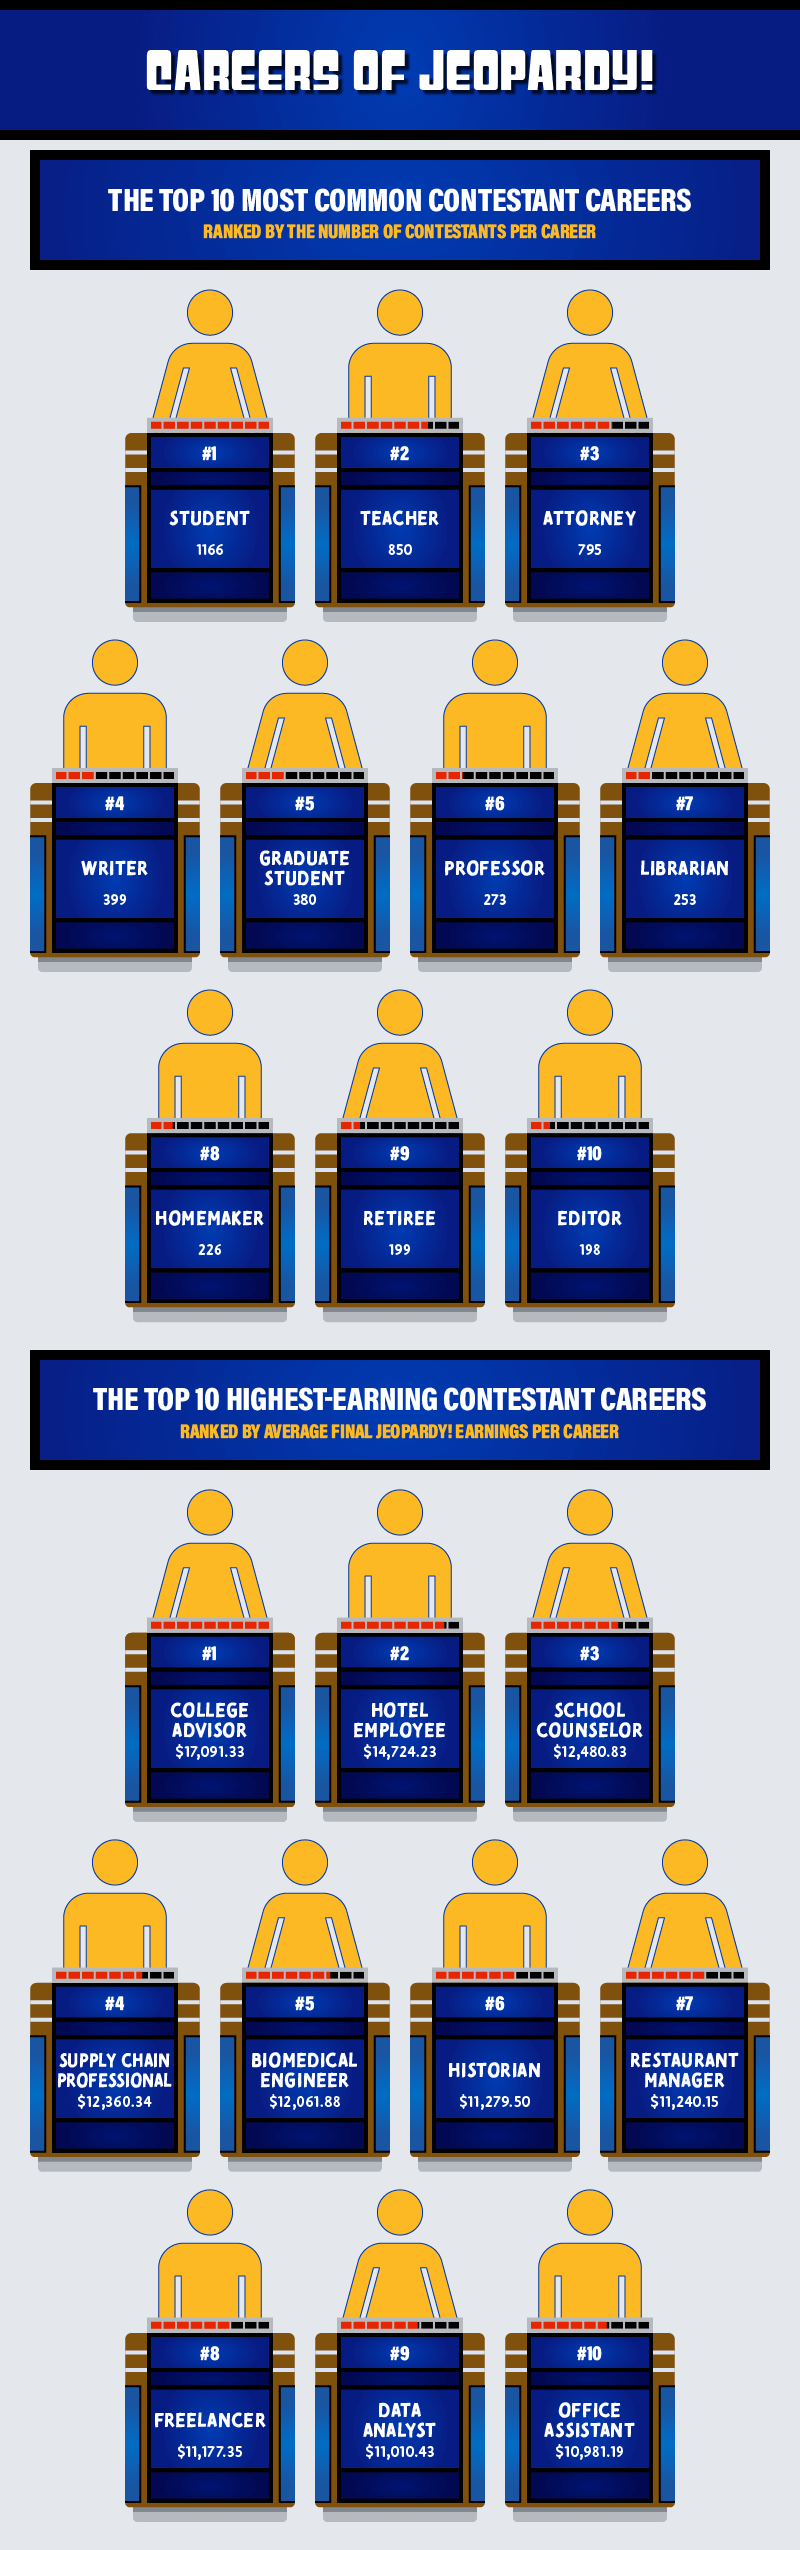 Poster revealing the most popular careers among Jeopardy! contestants